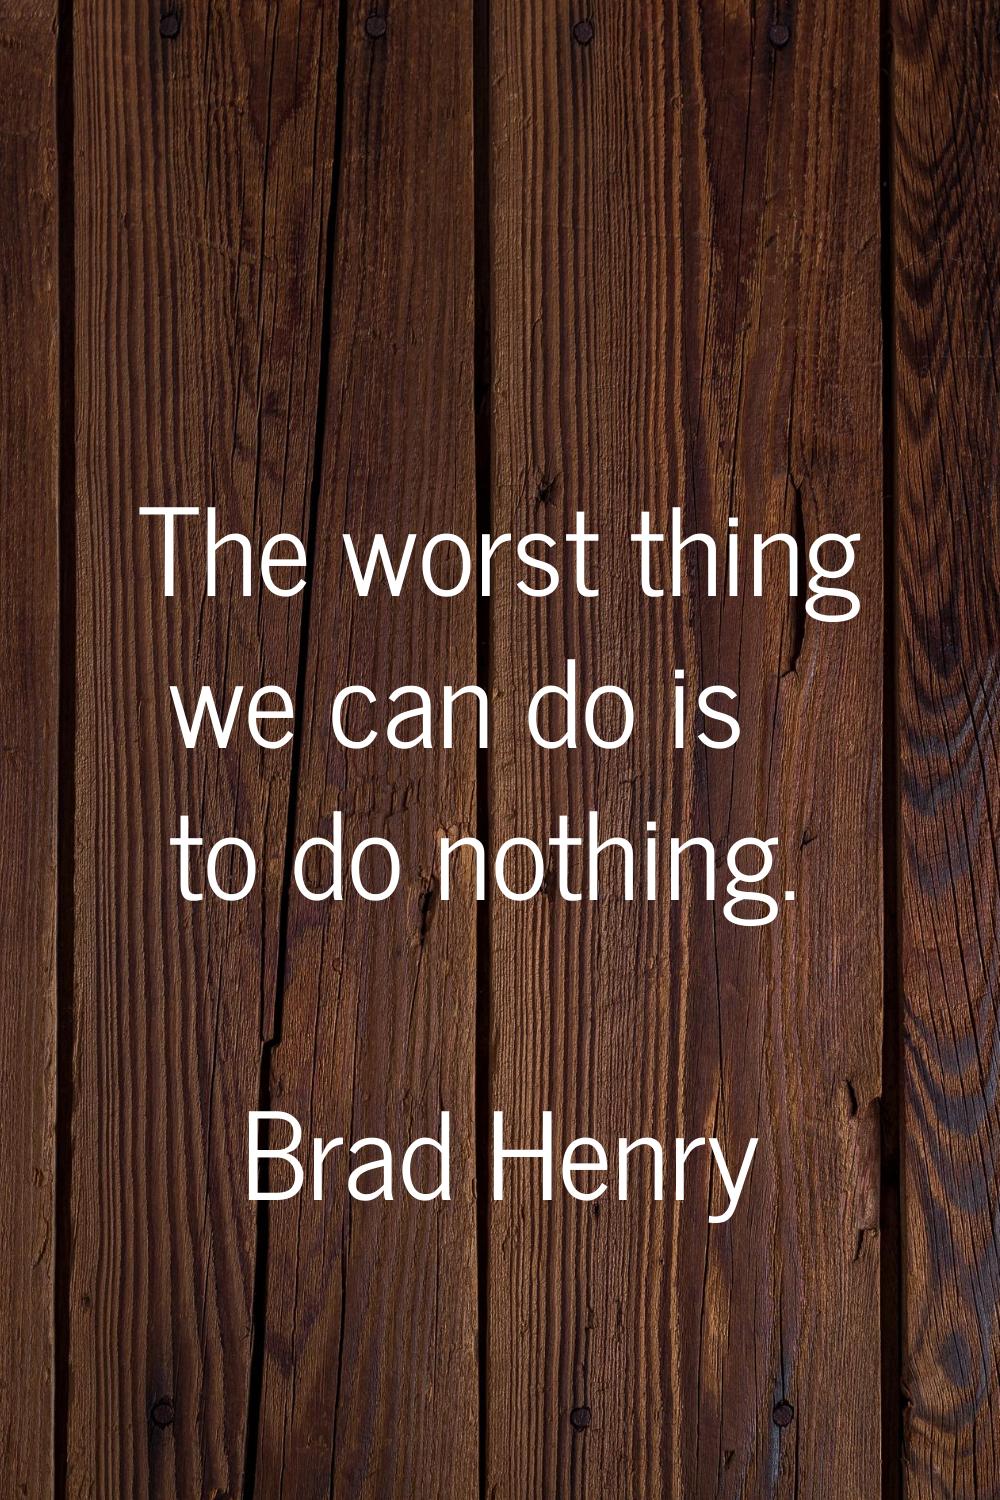 The worst thing we can do is to do nothing.